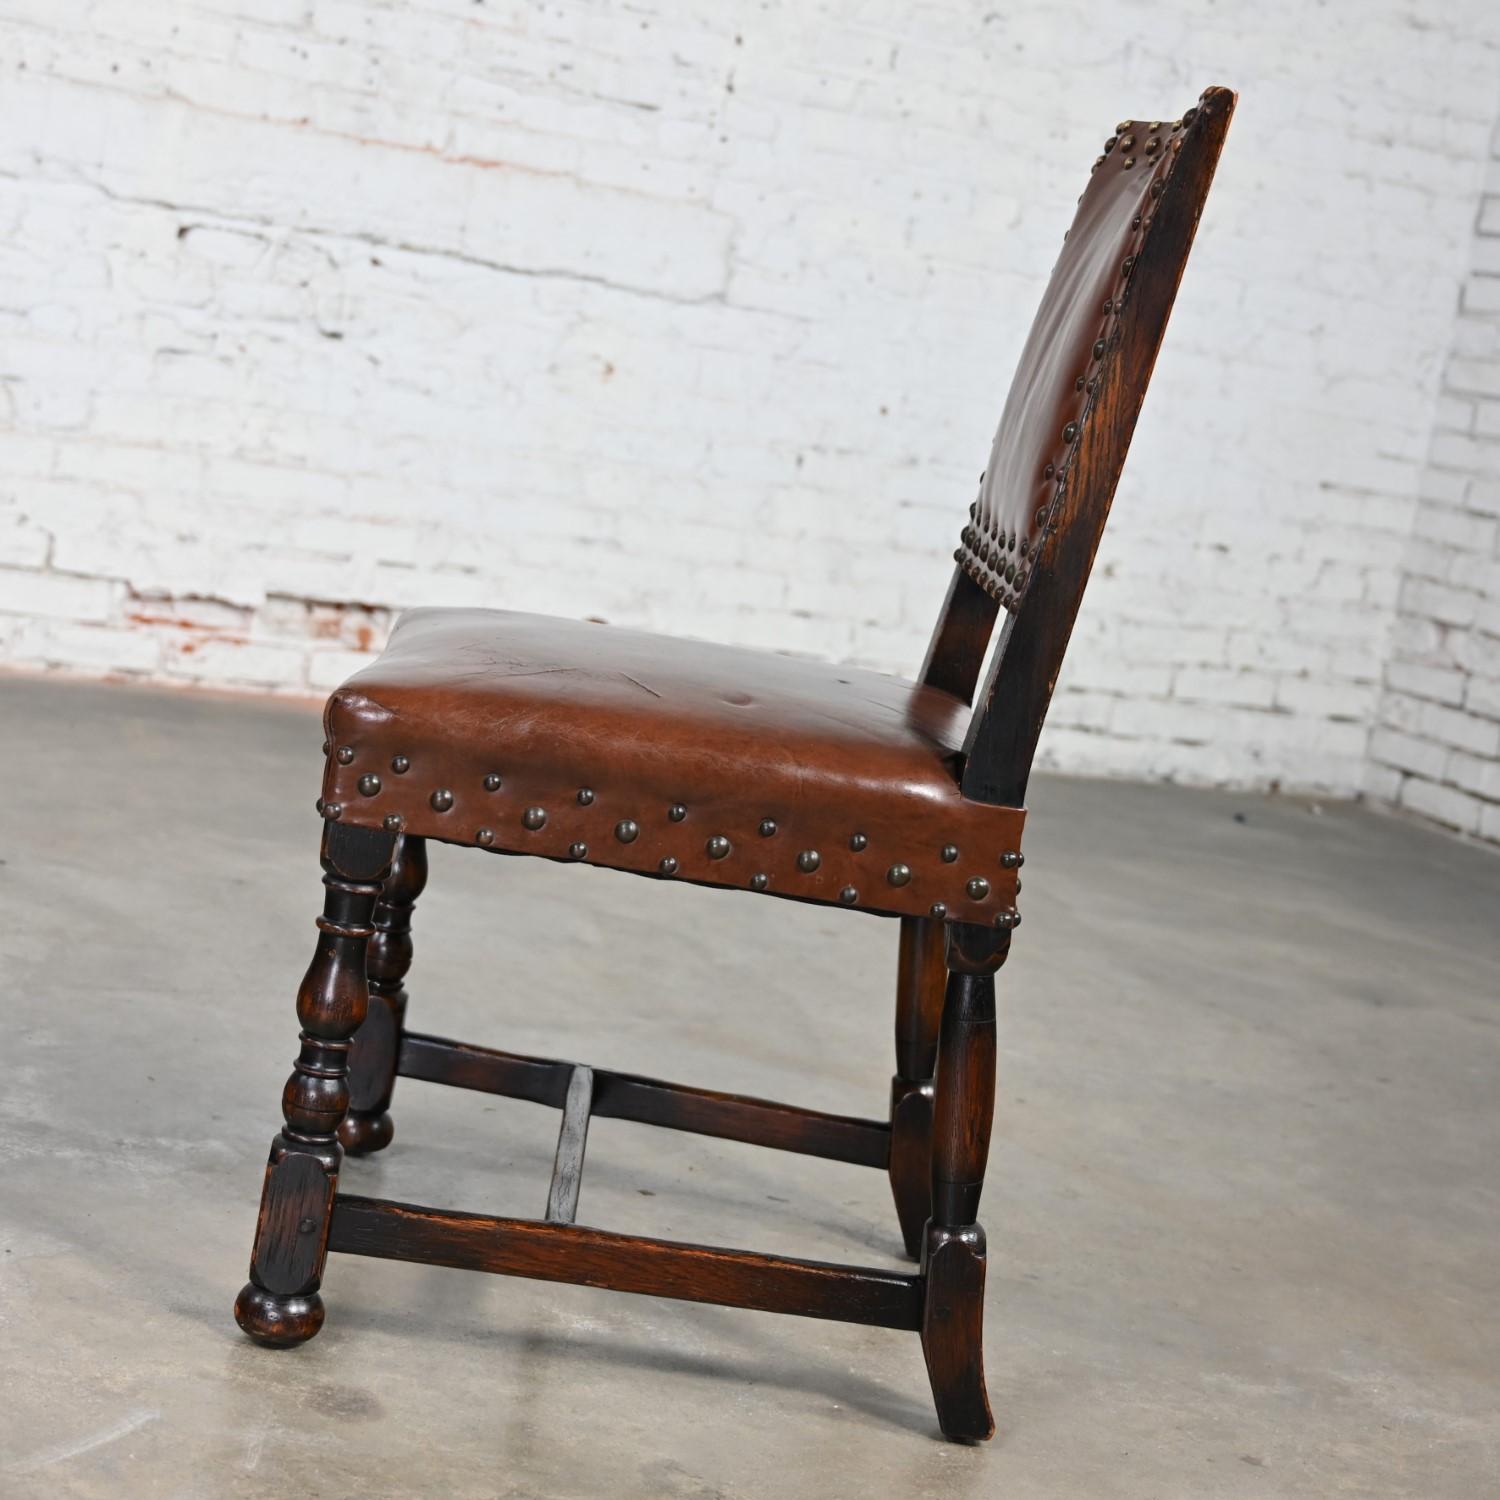 Spanish Revival Century Furniture Oak Side Chair Cognac Leather Nailhead Details In Good Condition For Sale In Topeka, KS